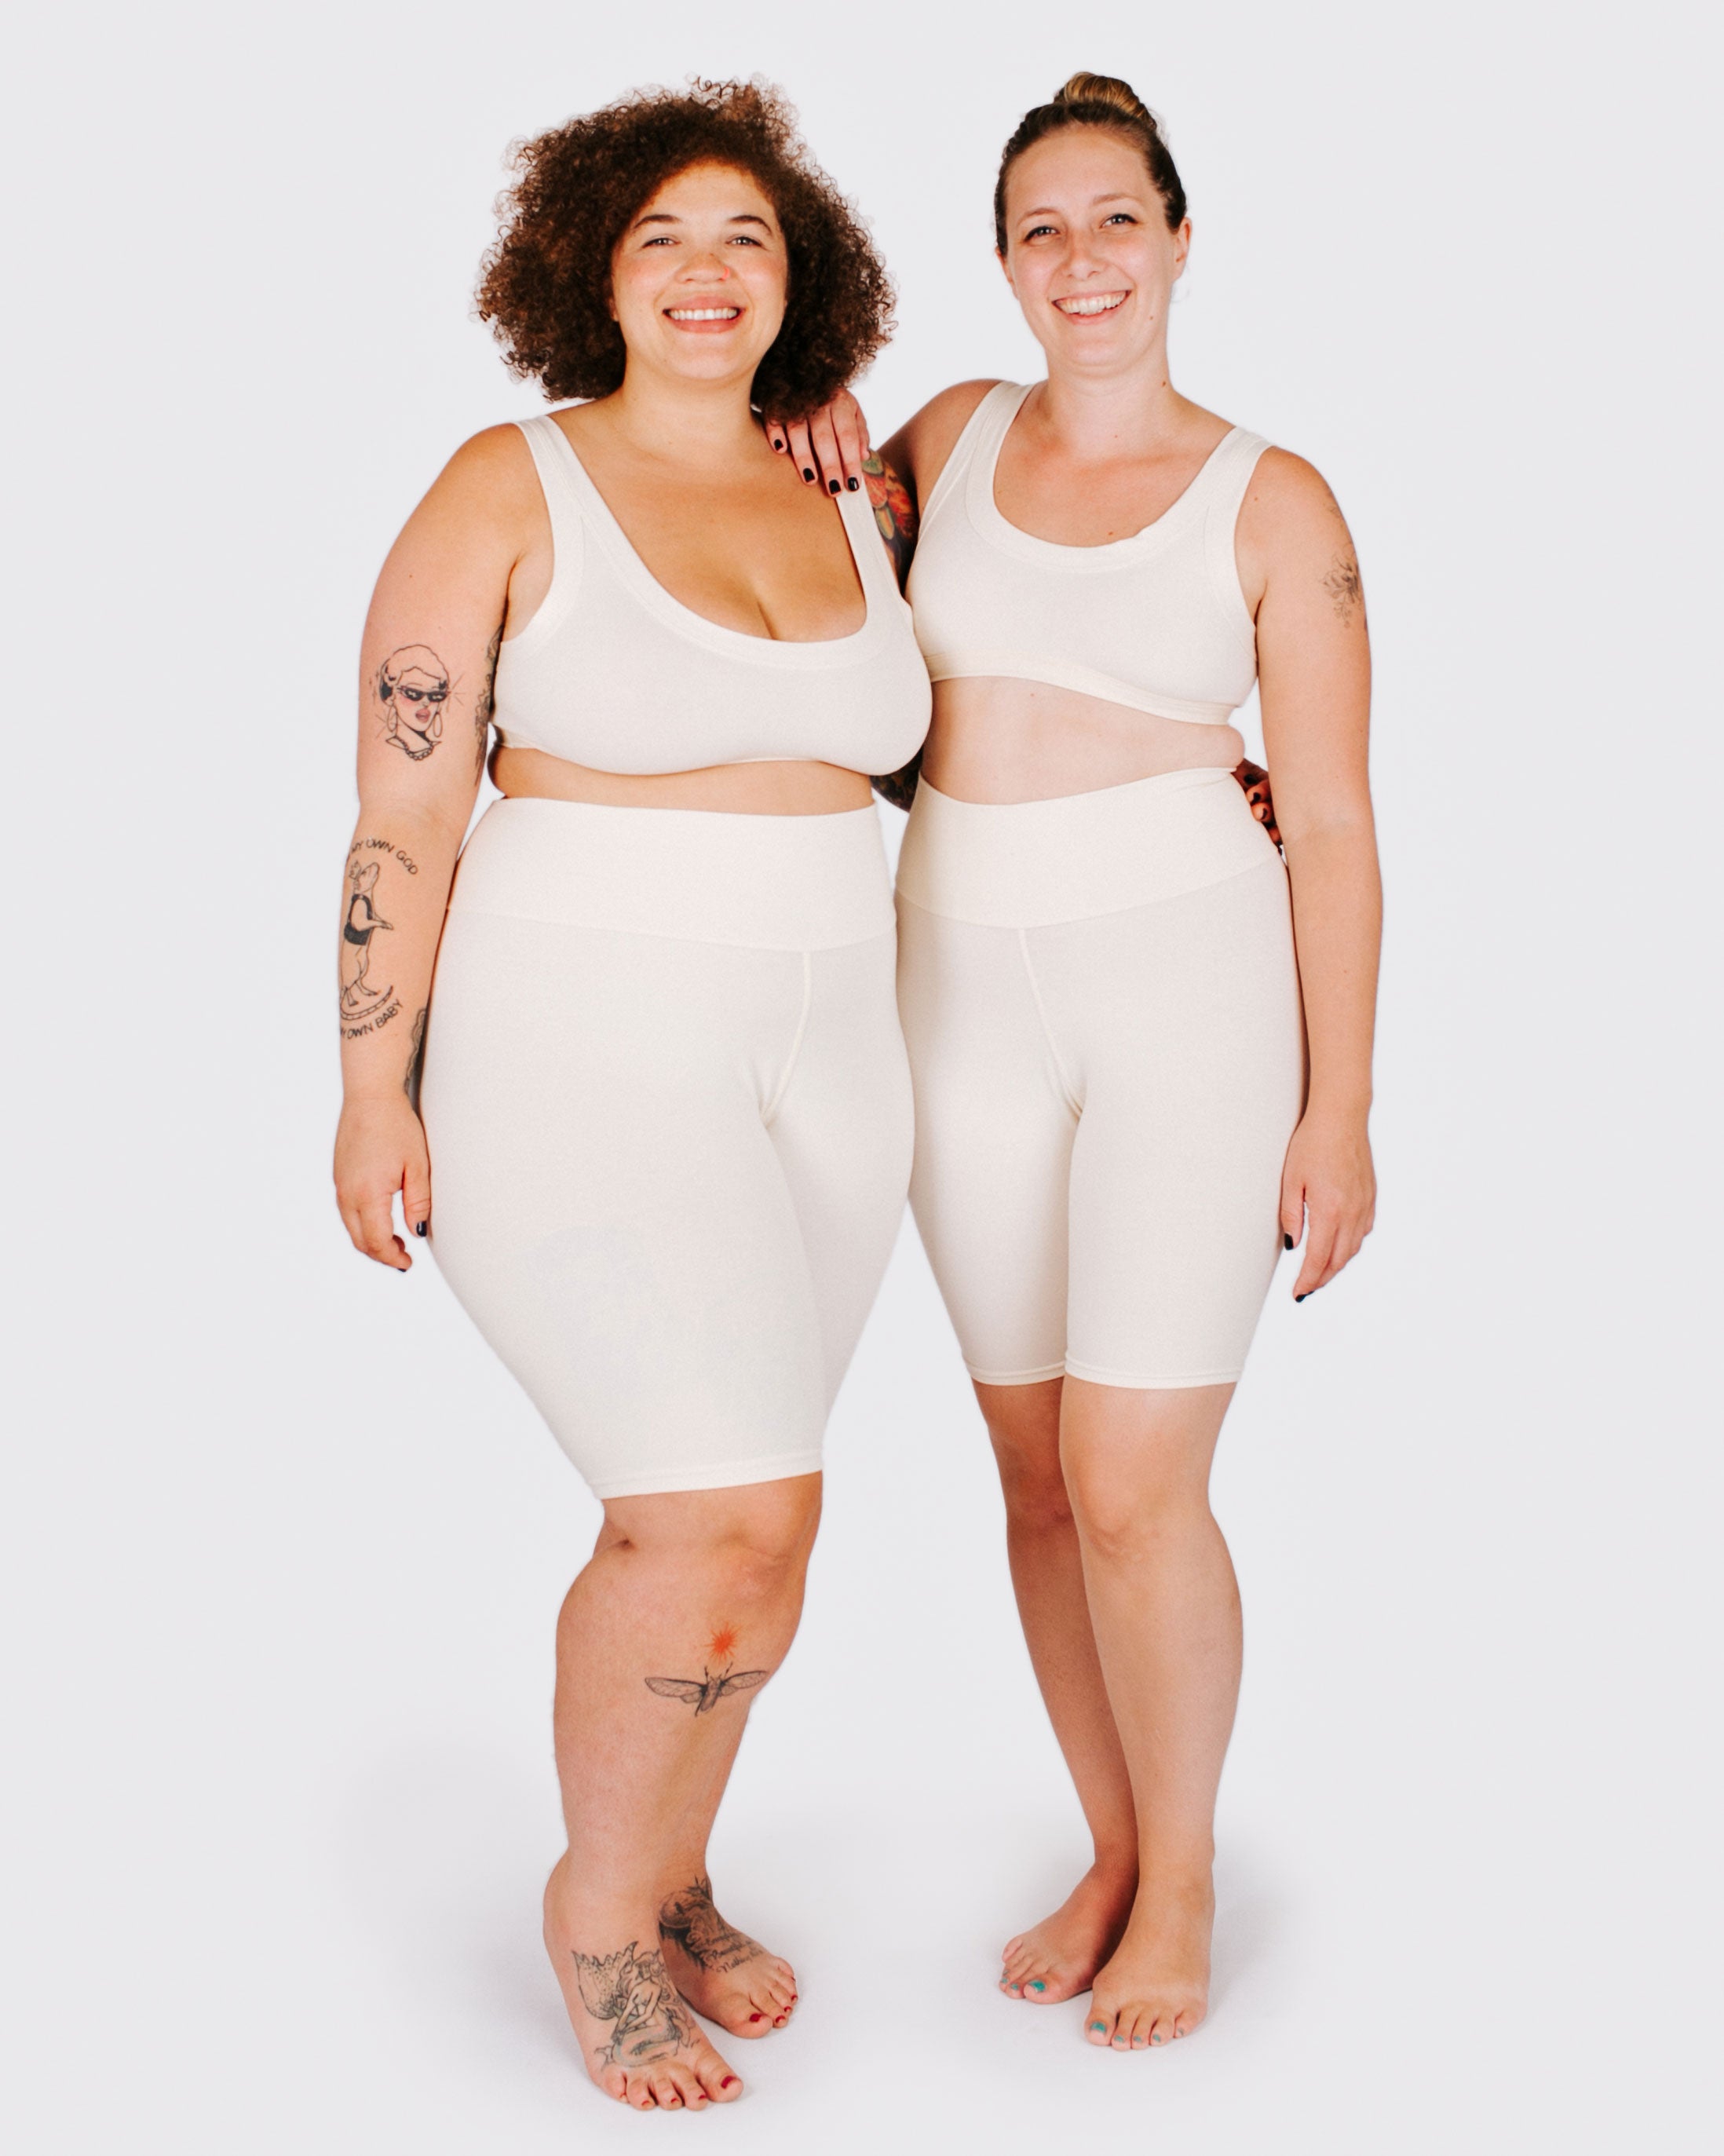 Fit photo from the front of Thunderpants organic cotton Bike Shorts and Bralettes in off-white on two model standing together.